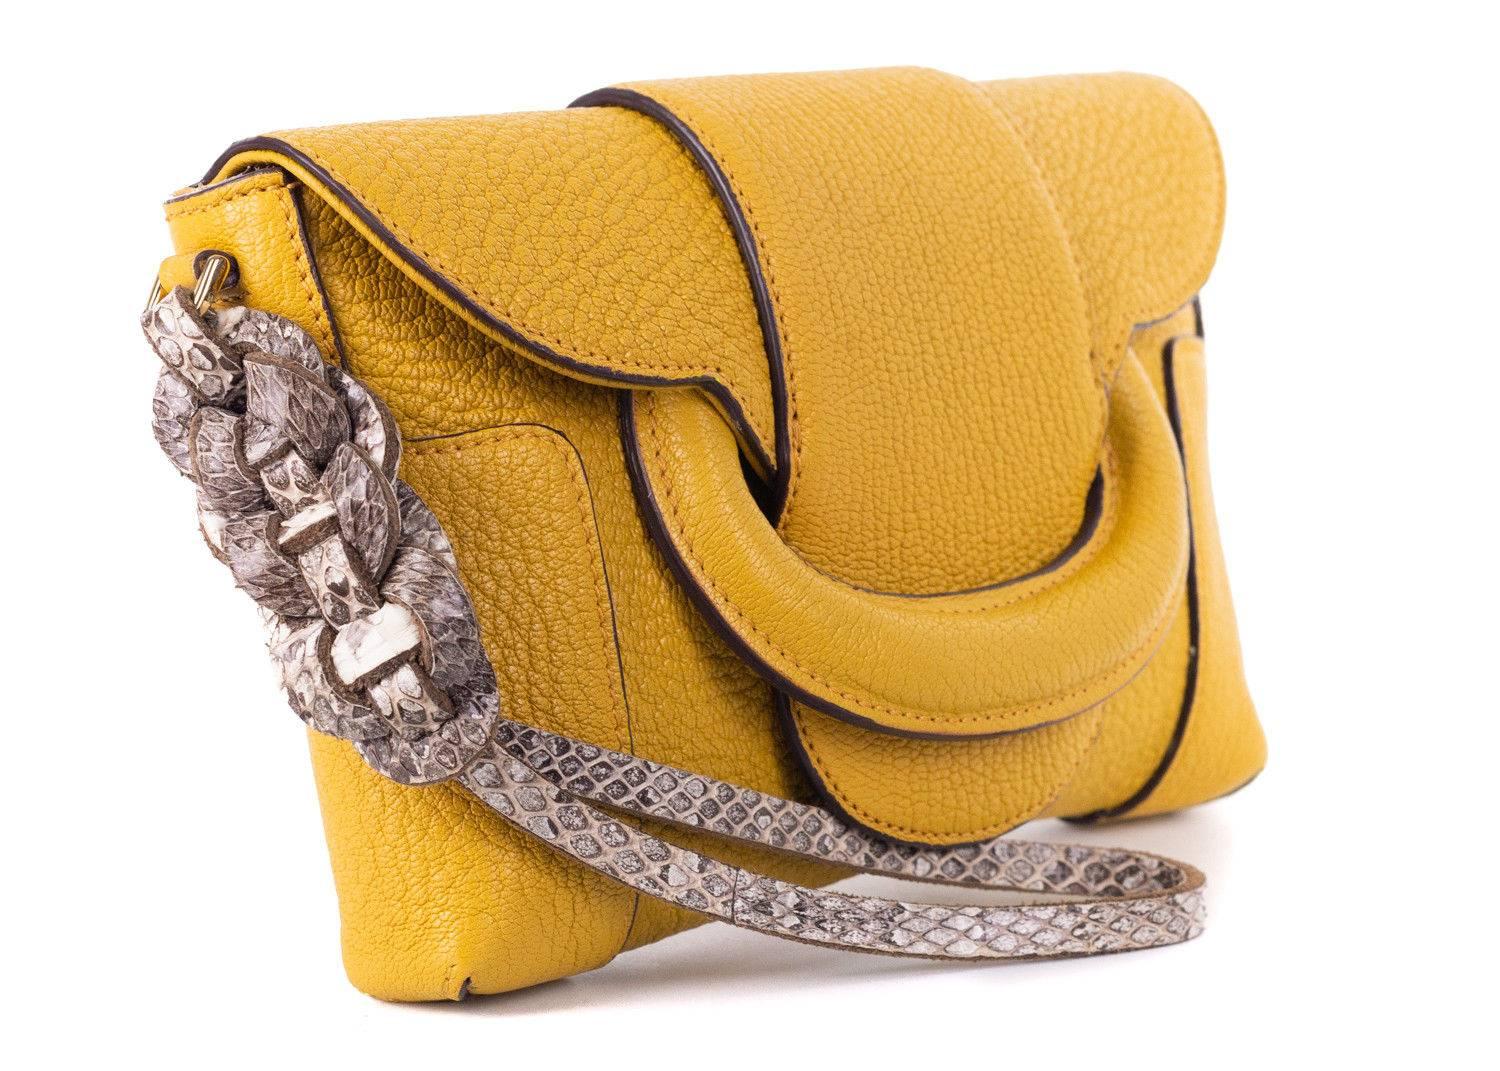 Roberto Cavalli Solid Mustard Yellow Grained Leather Wristlet Clutch For Sale 1